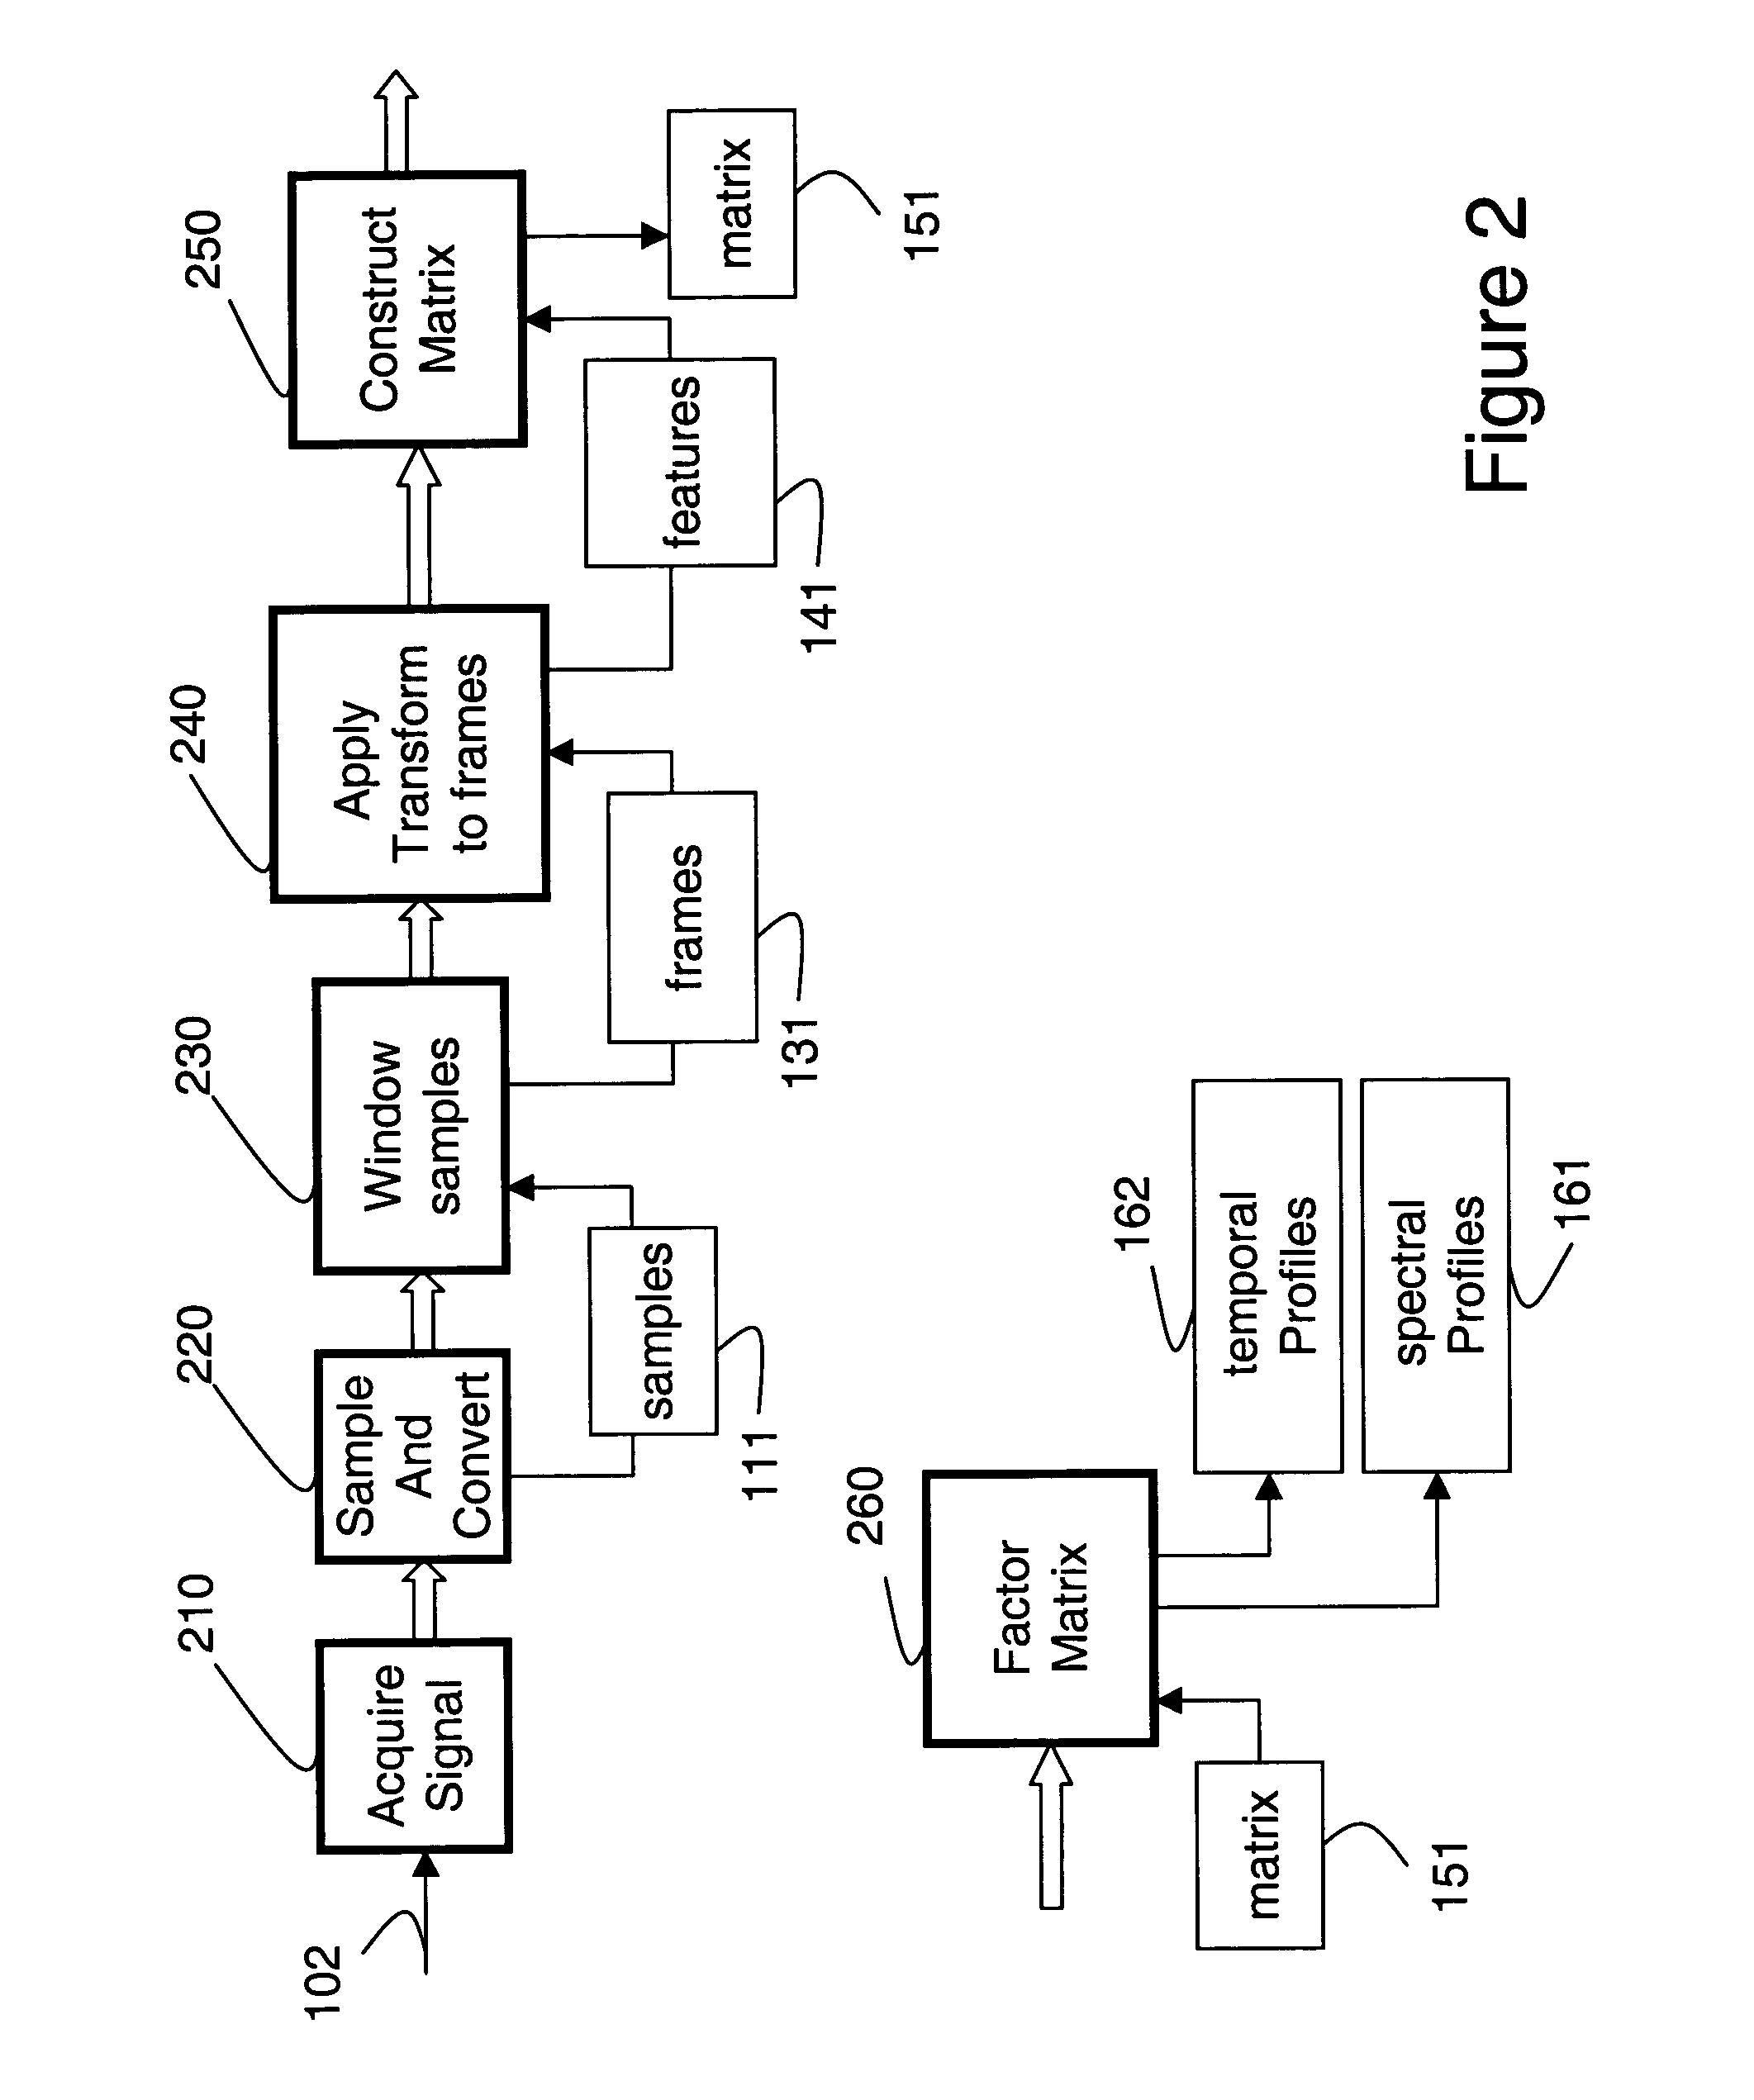 Method and system for detecting and temporally relating components in non-stationary signals